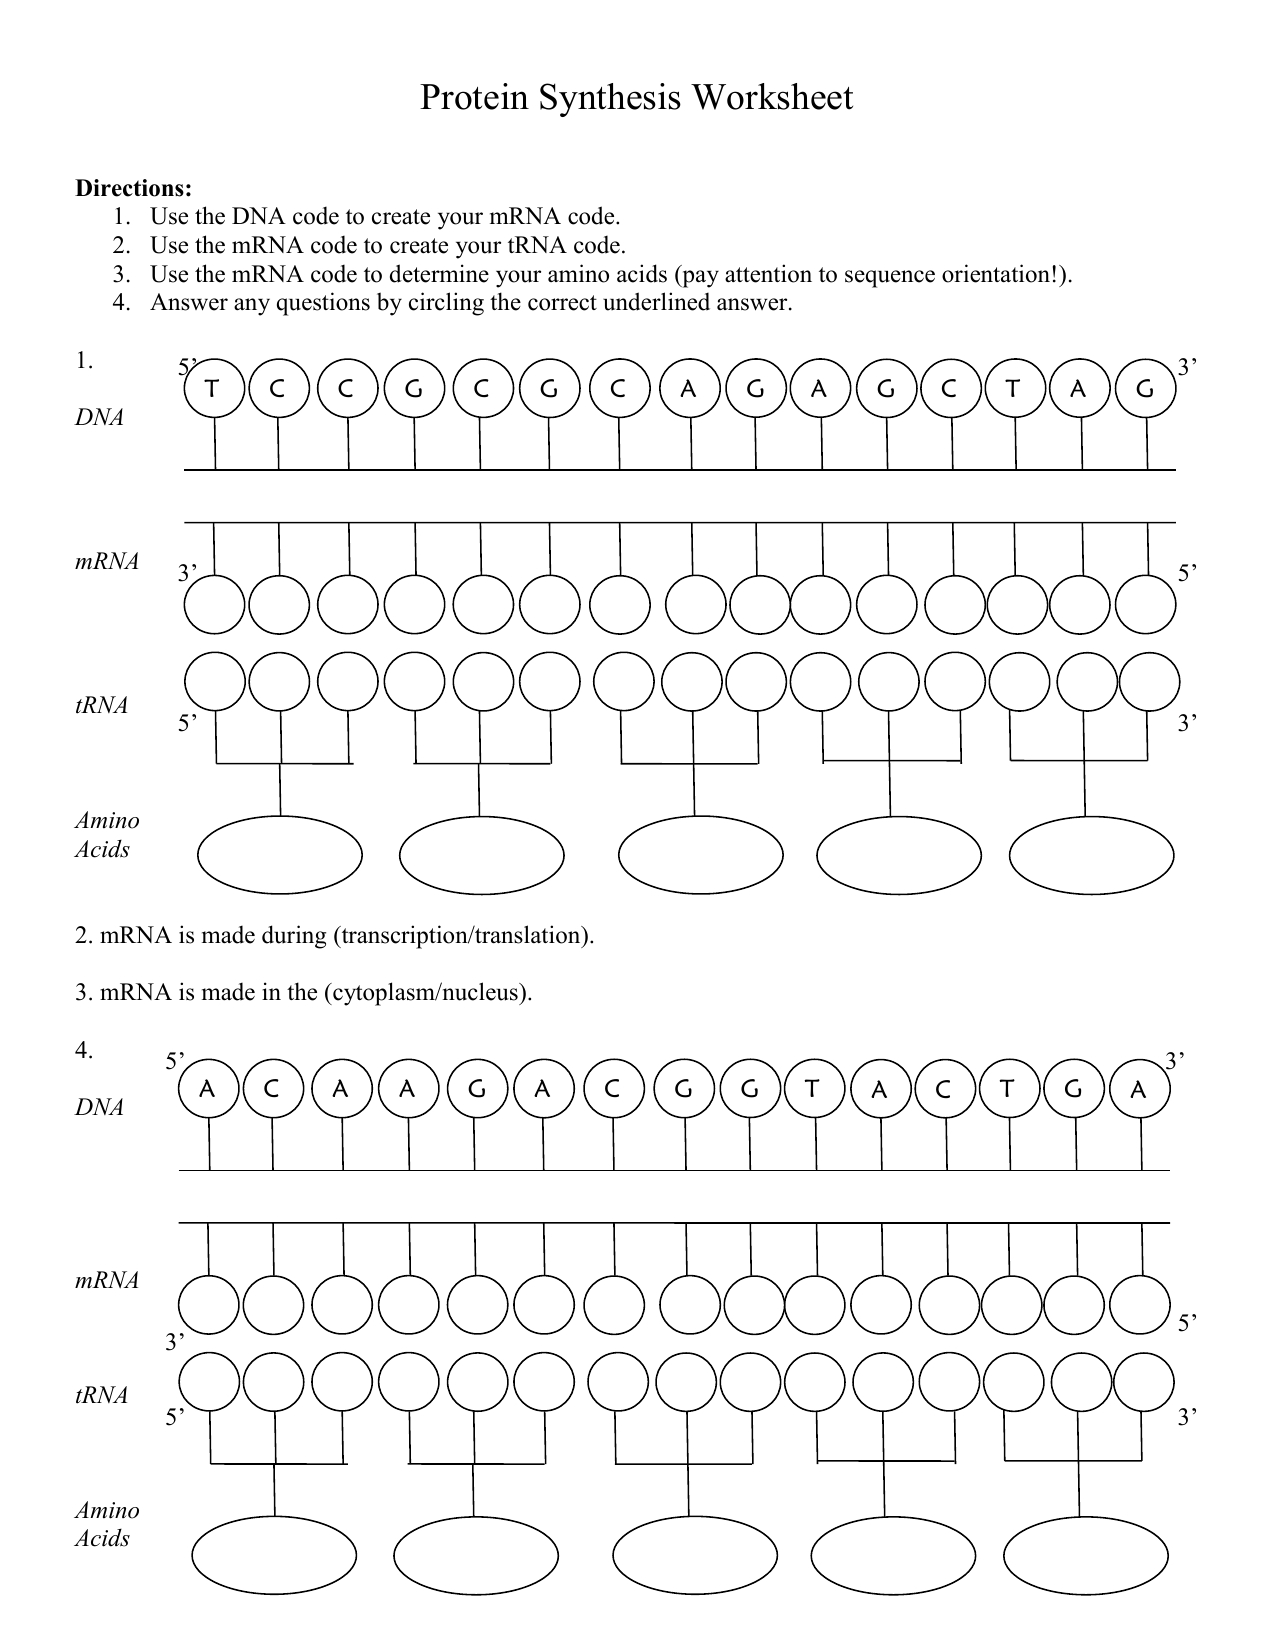 Protein Synthesis Worksheet And Protein Synthesis Worksheet Answers